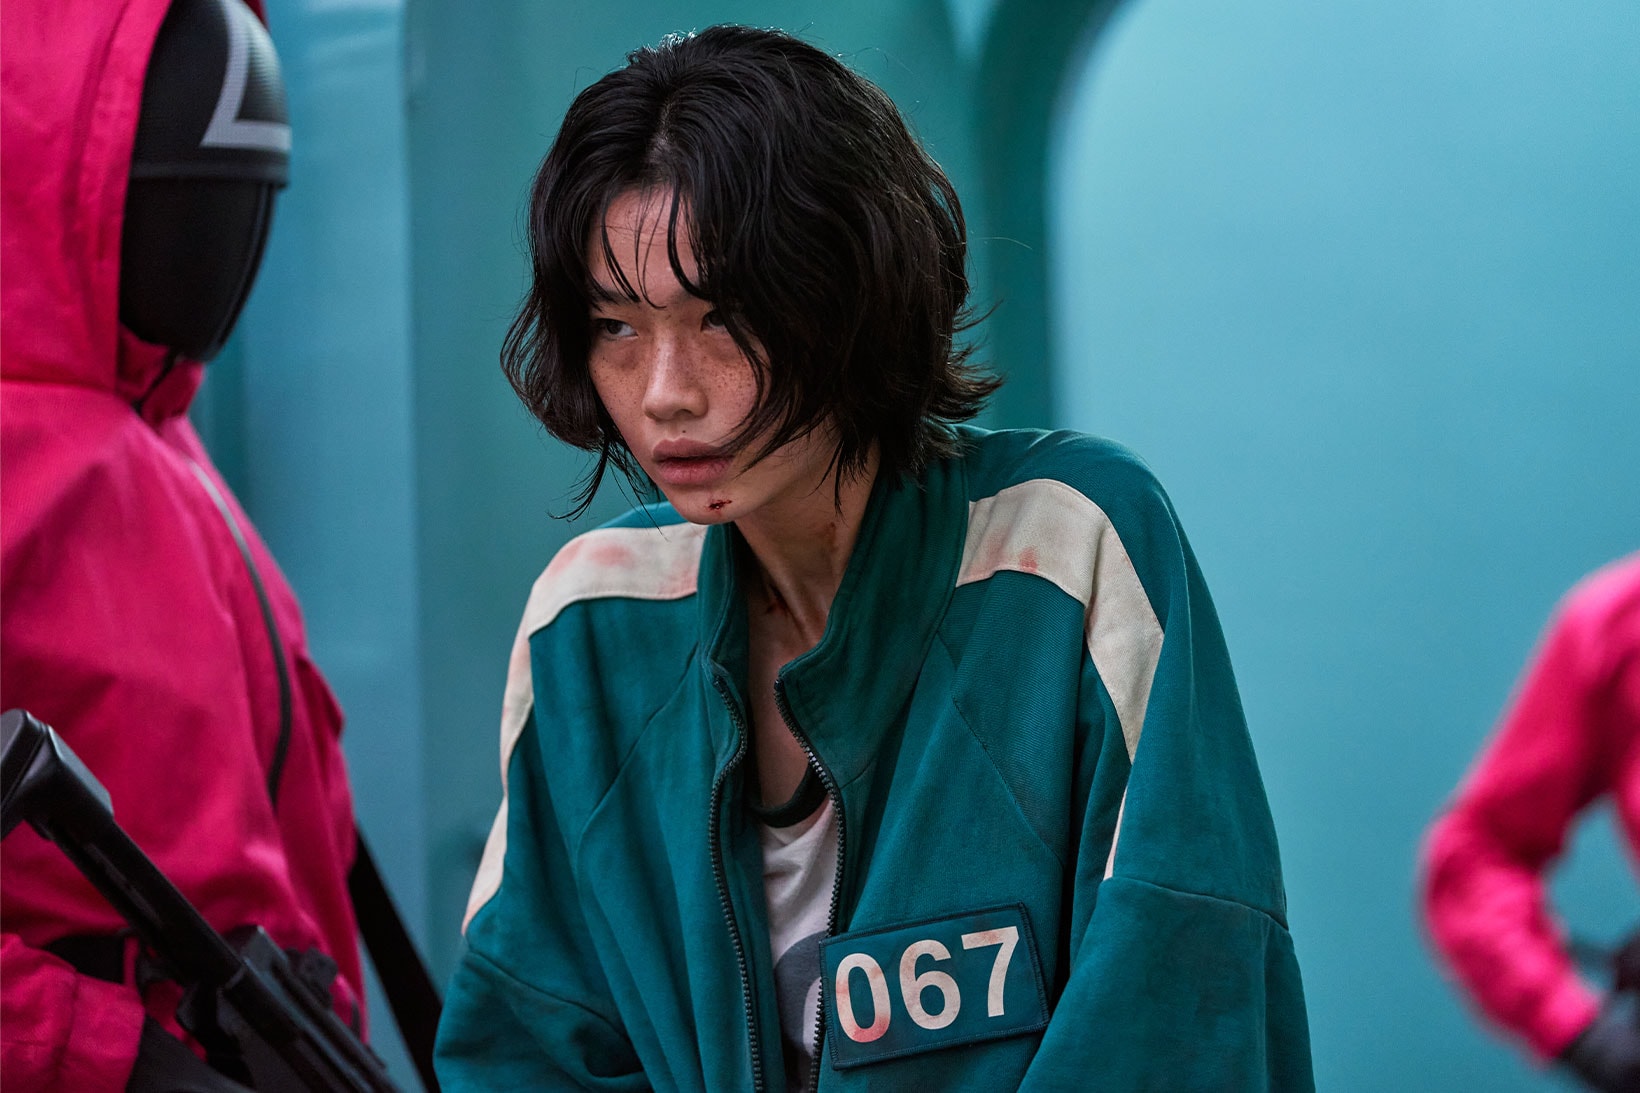 Who Plays Kang Sae-Byeok In Netflix's Squid Game?